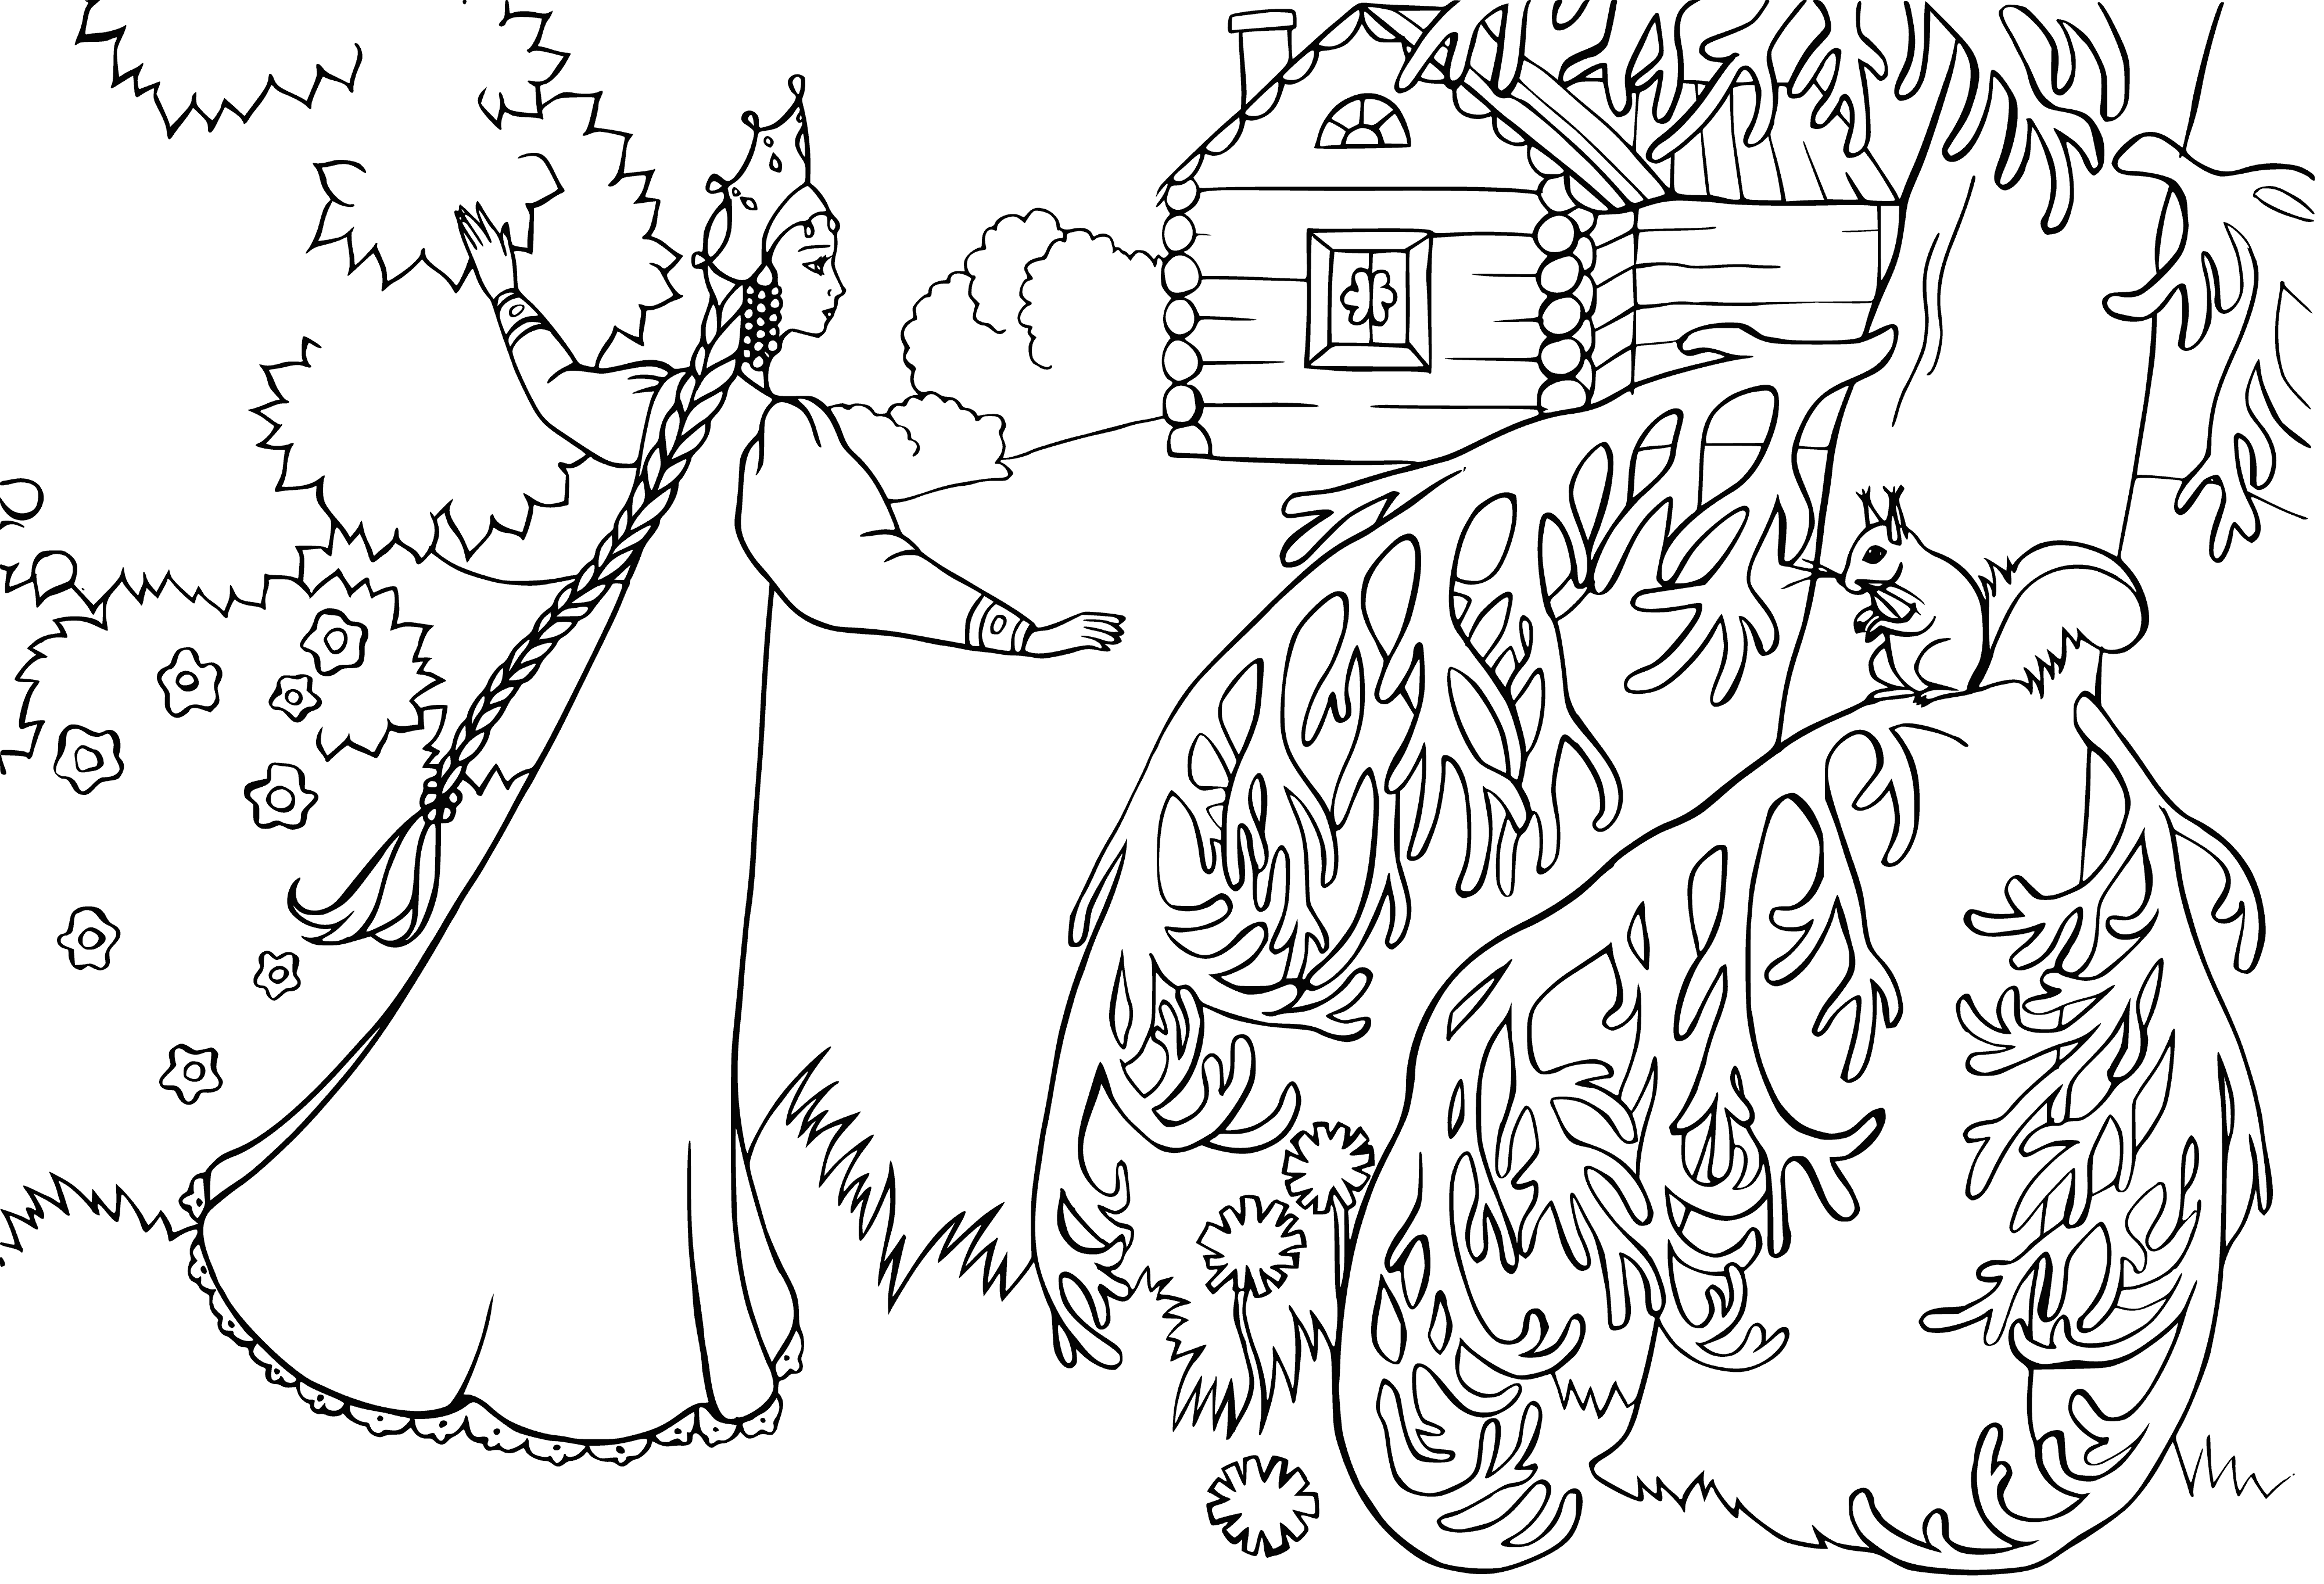 coloring page: Small round hut made of sticks, leaves, with a door/window and thatched roof. Garden of flowers in front.